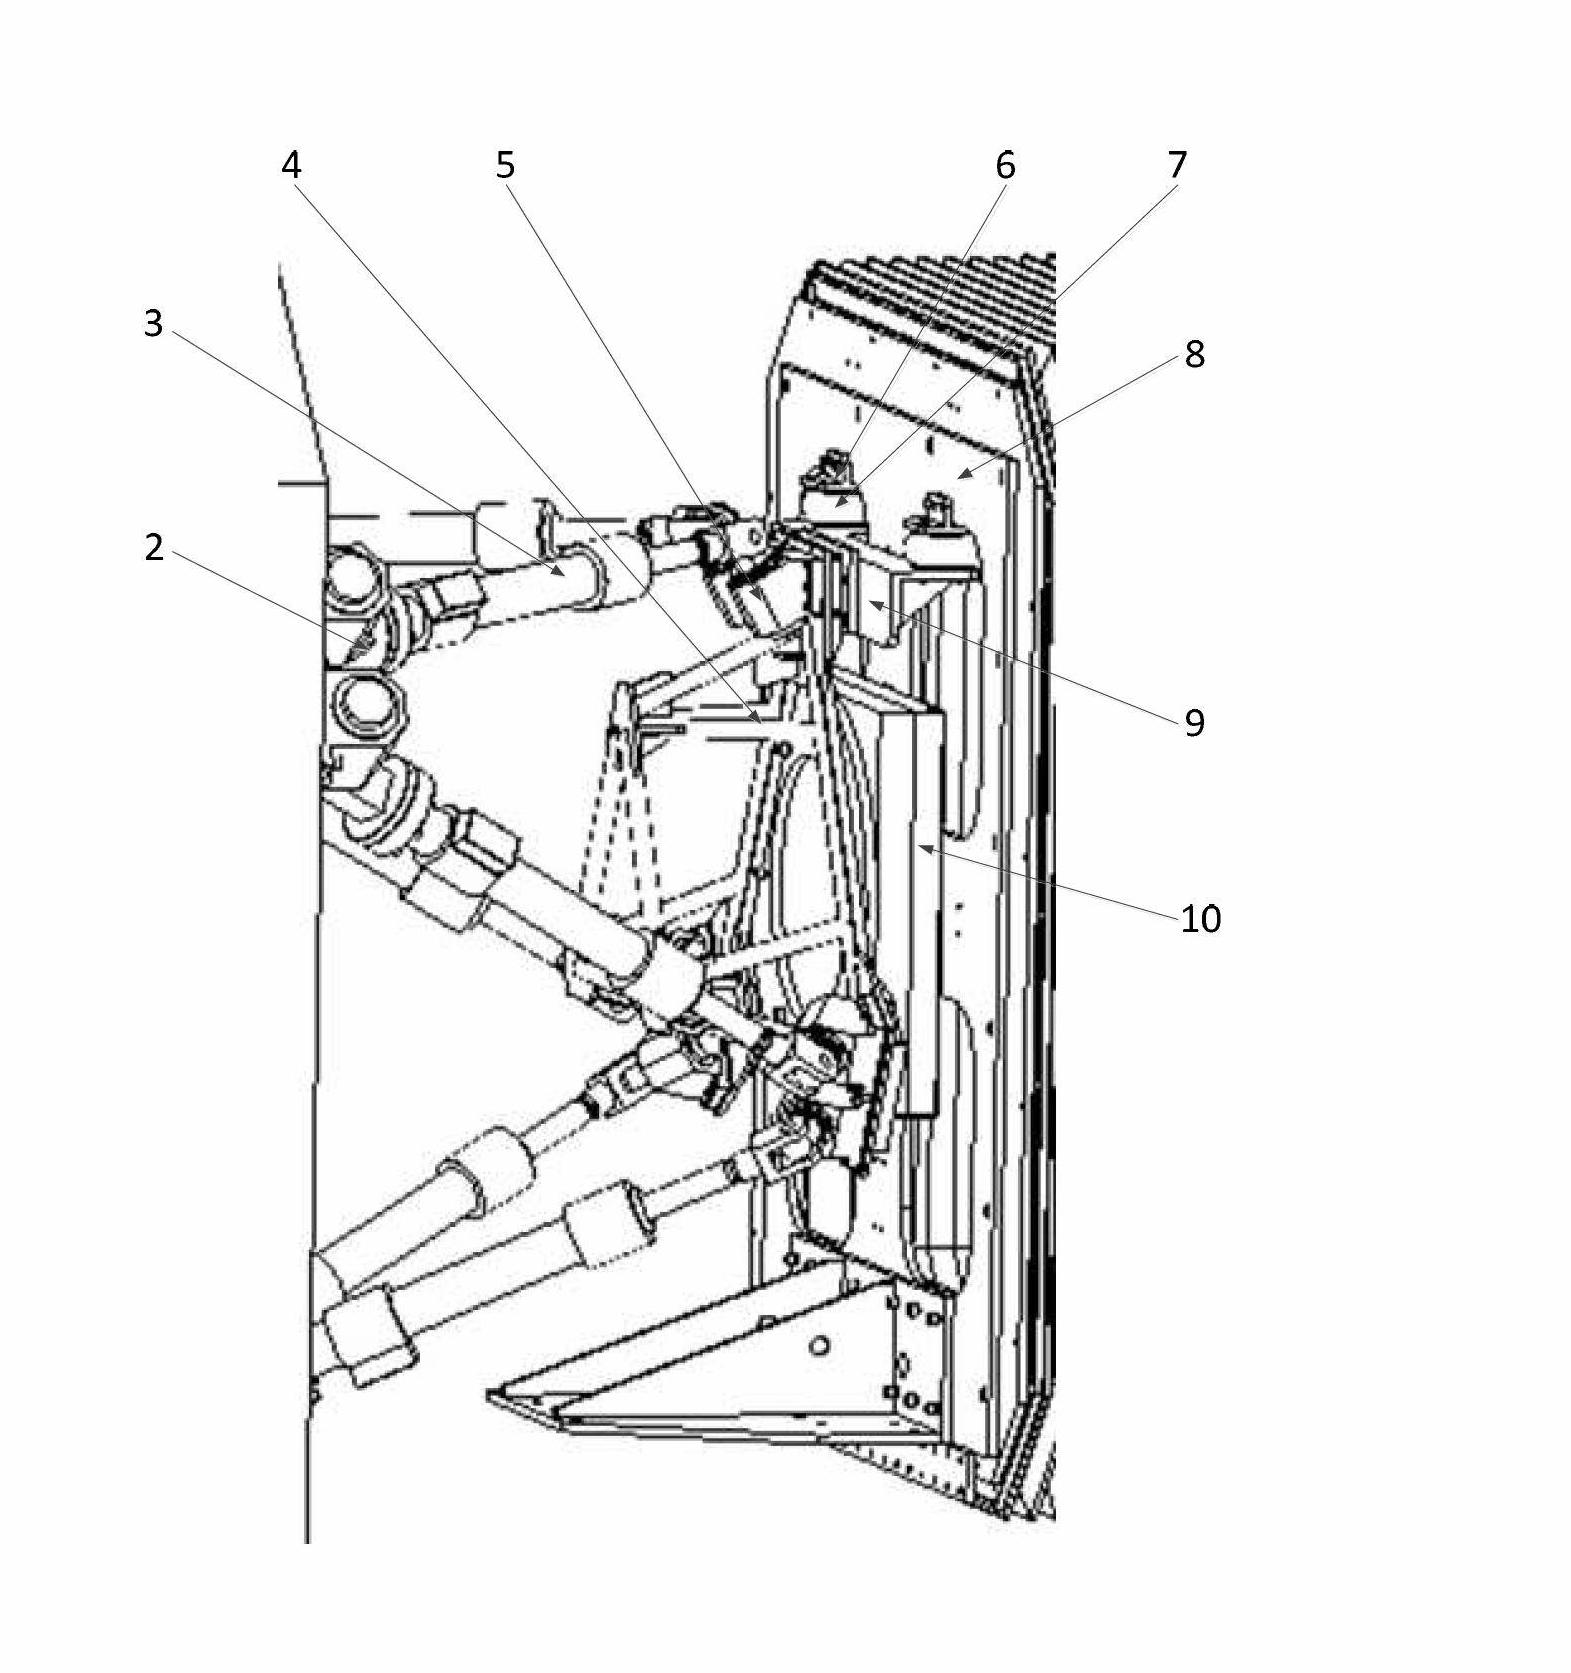 Loading device based on six-degree-of-freedom parallel mechanisms